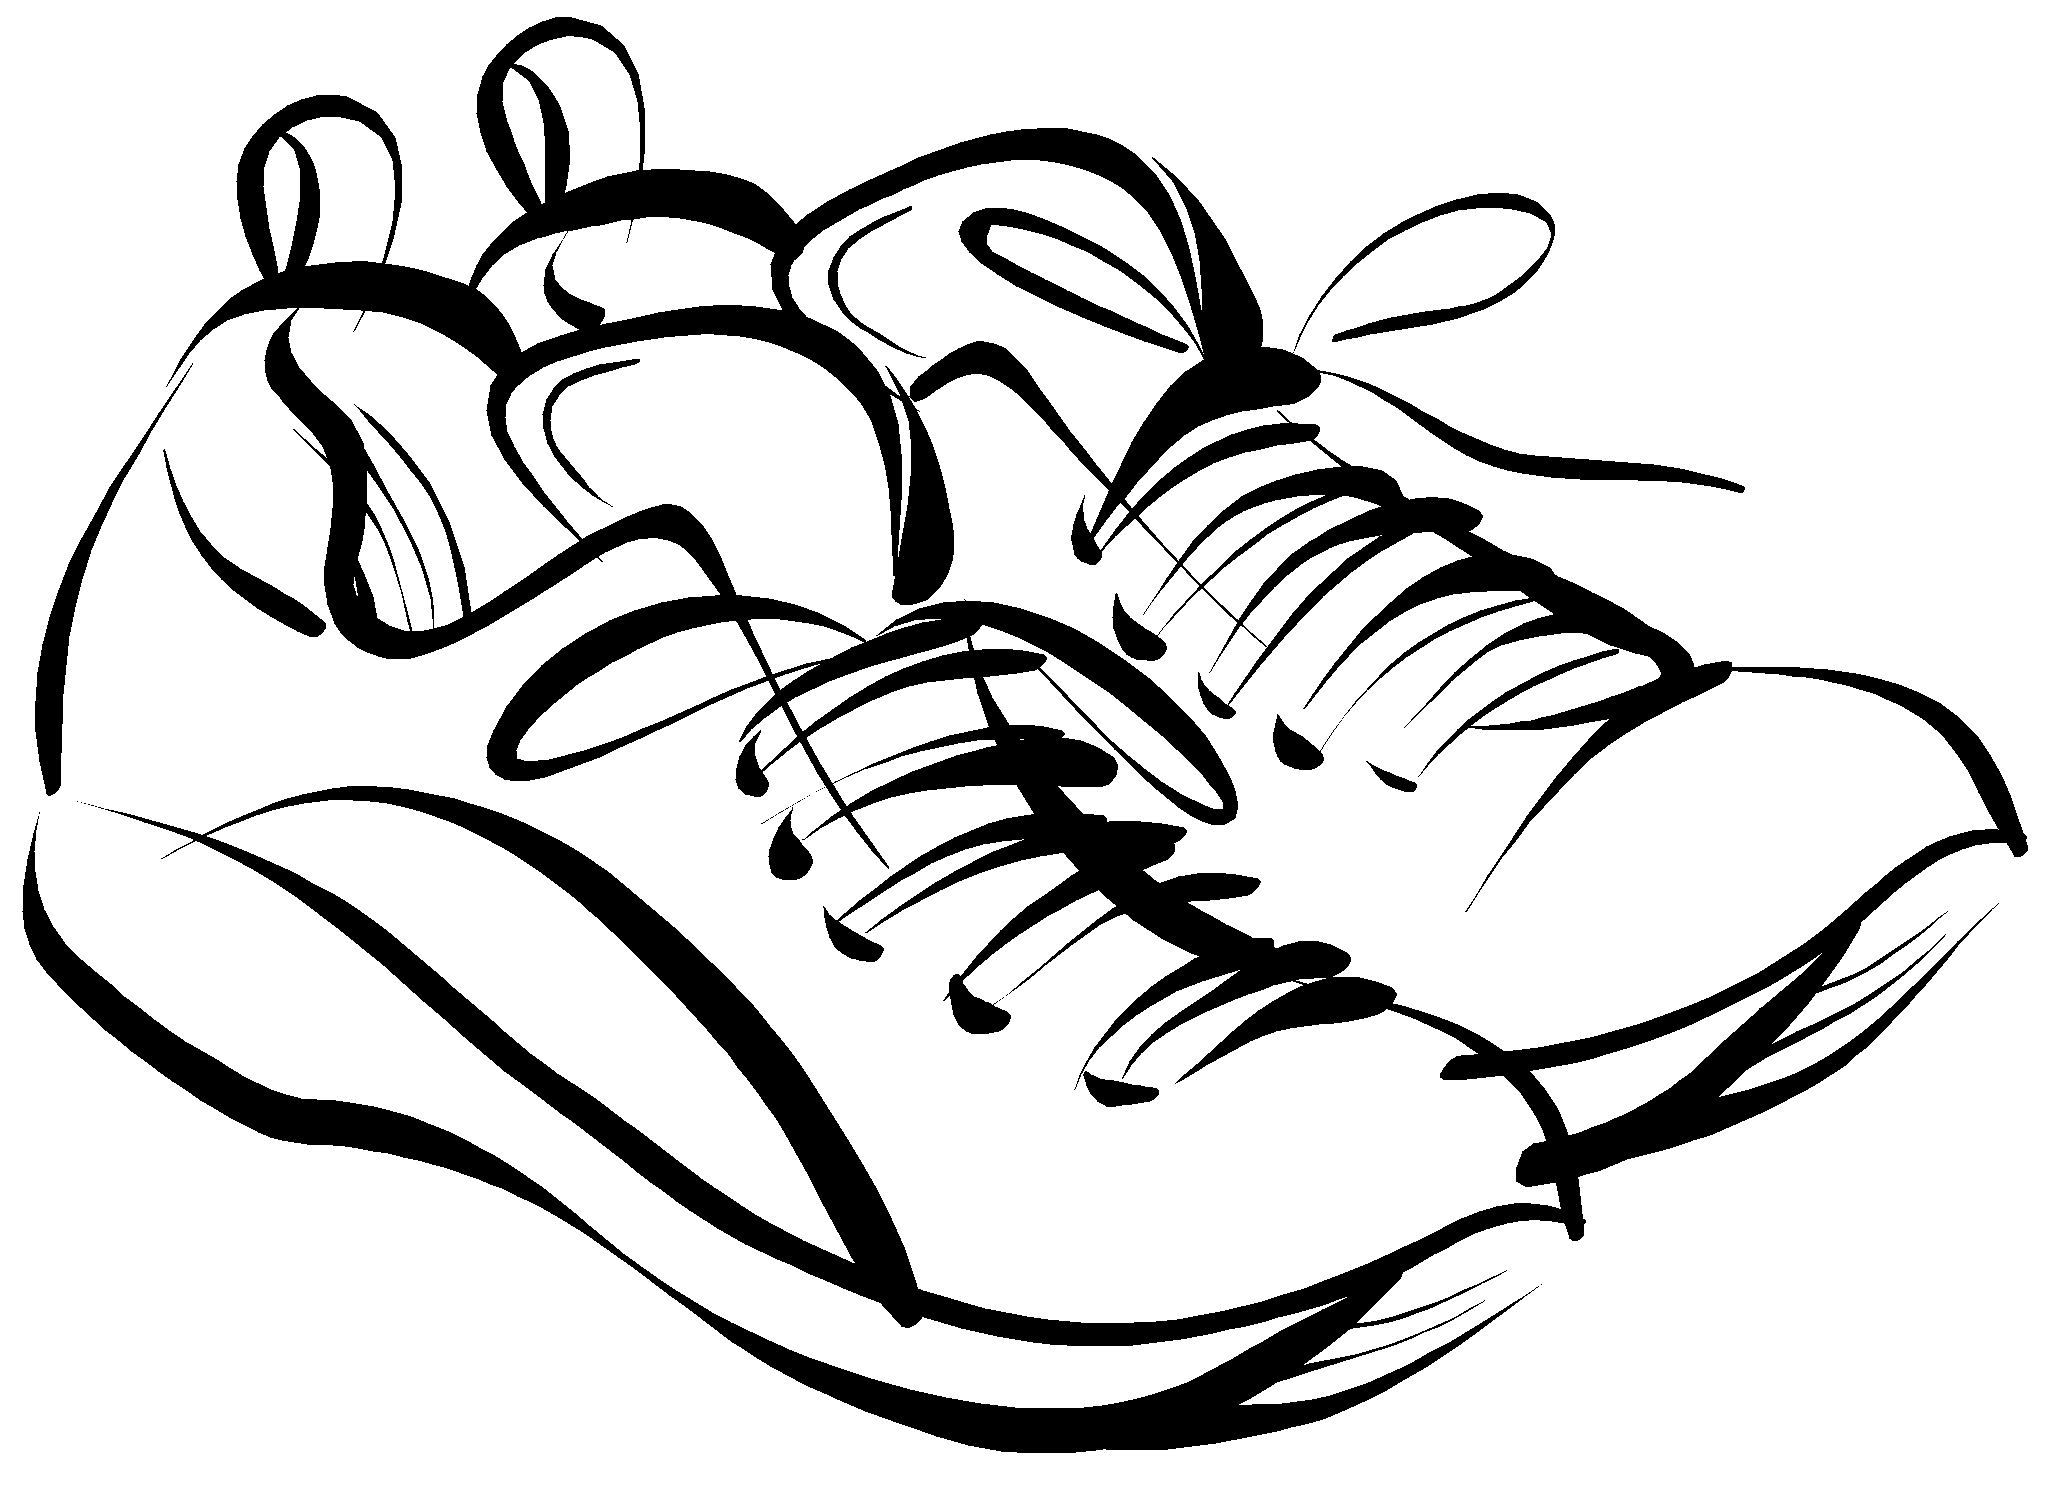 Running Shoes Clipart - Clipart Suggest